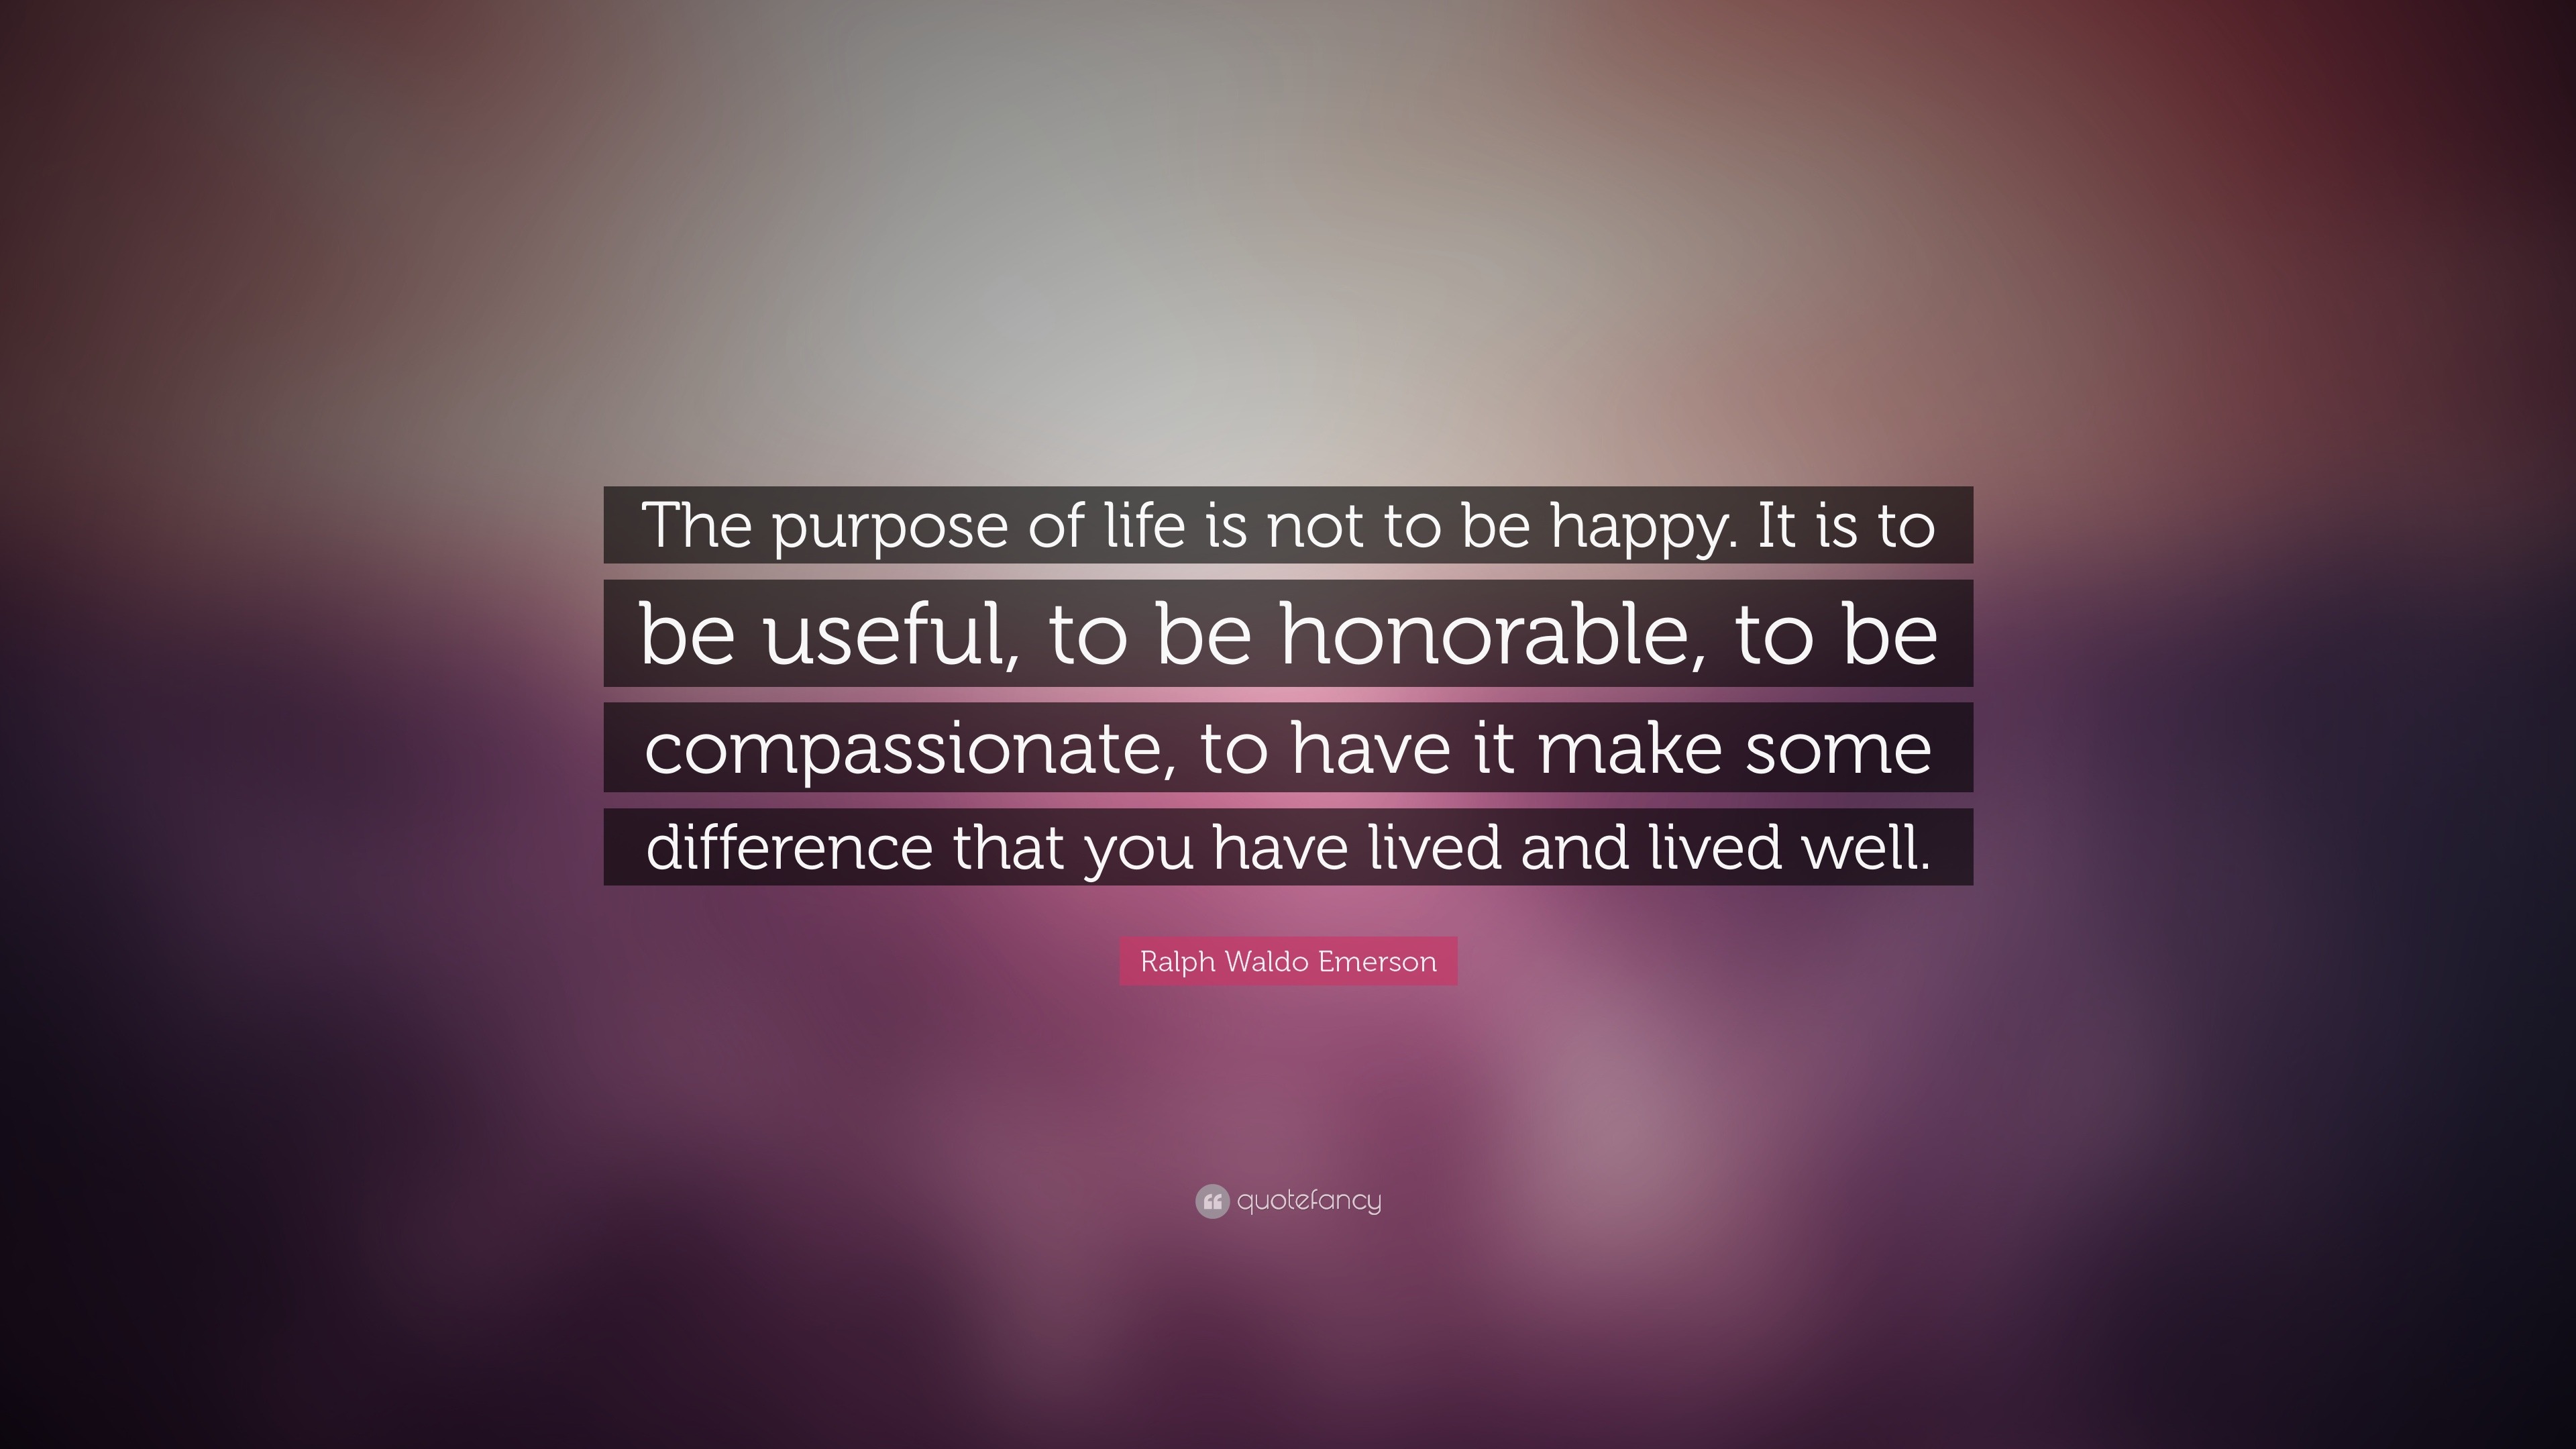 Ralph Waldo Emerson Quote “The purpose of life is not to be happy